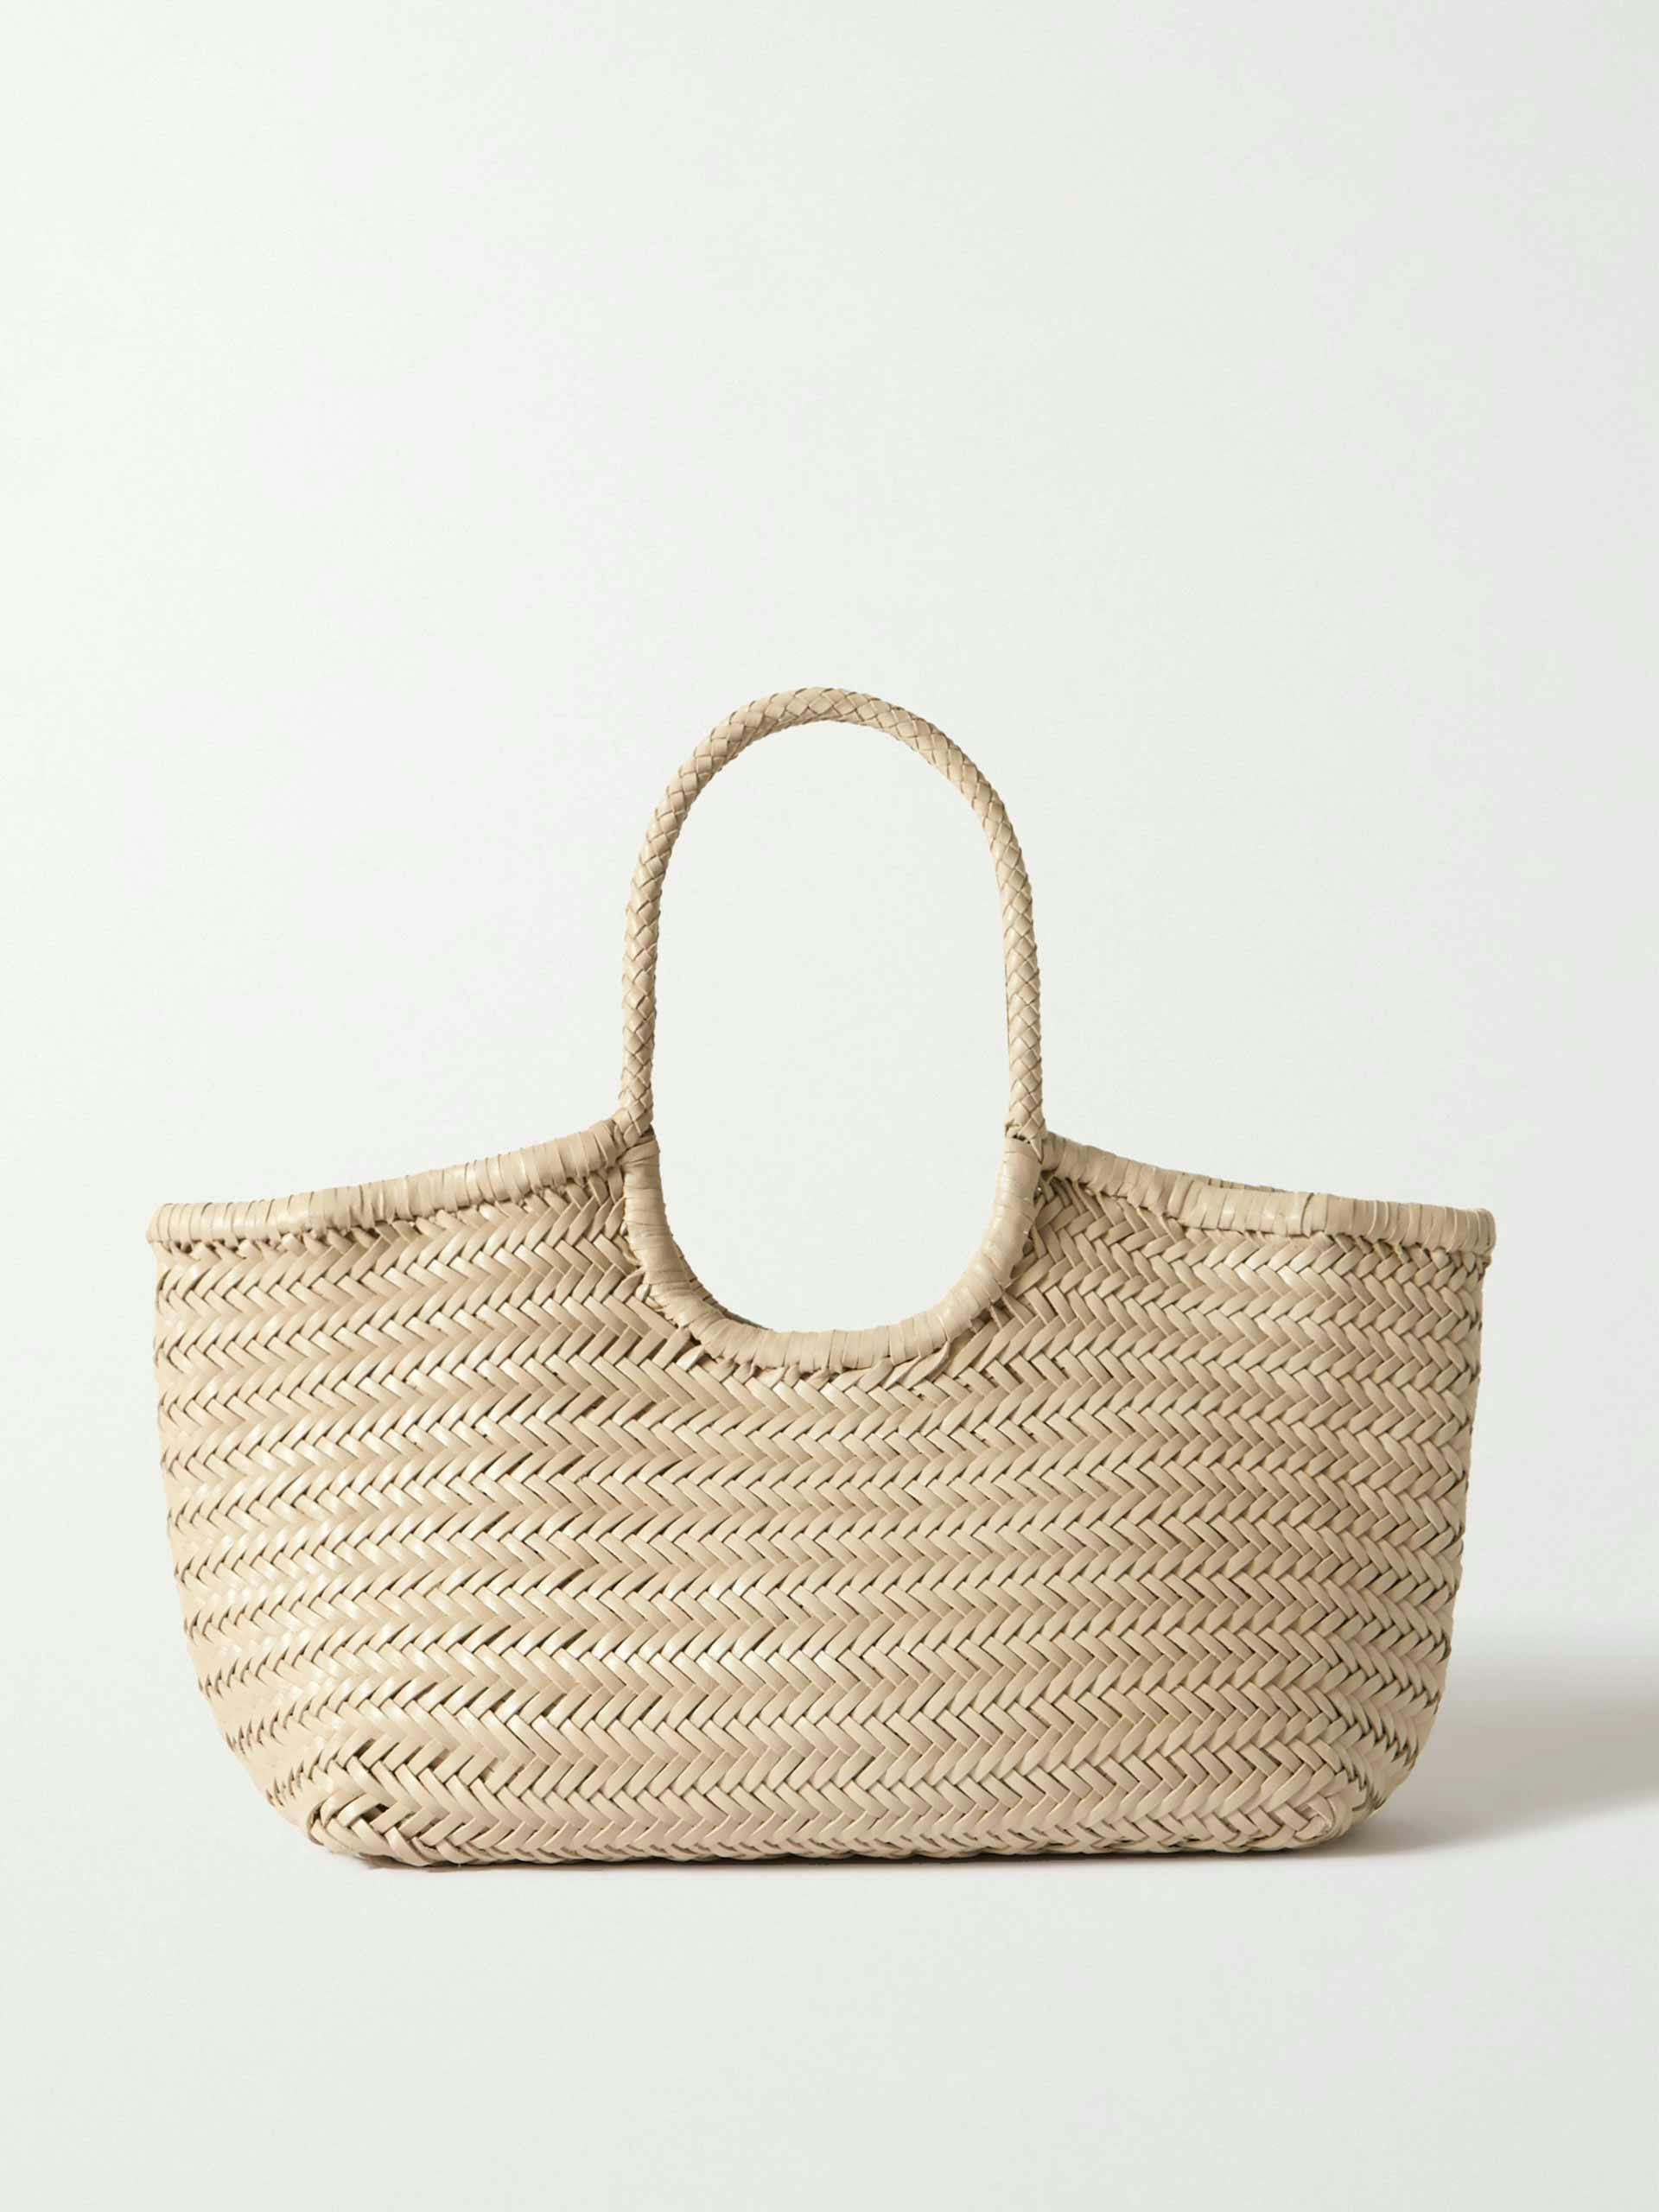 Woven leather tote